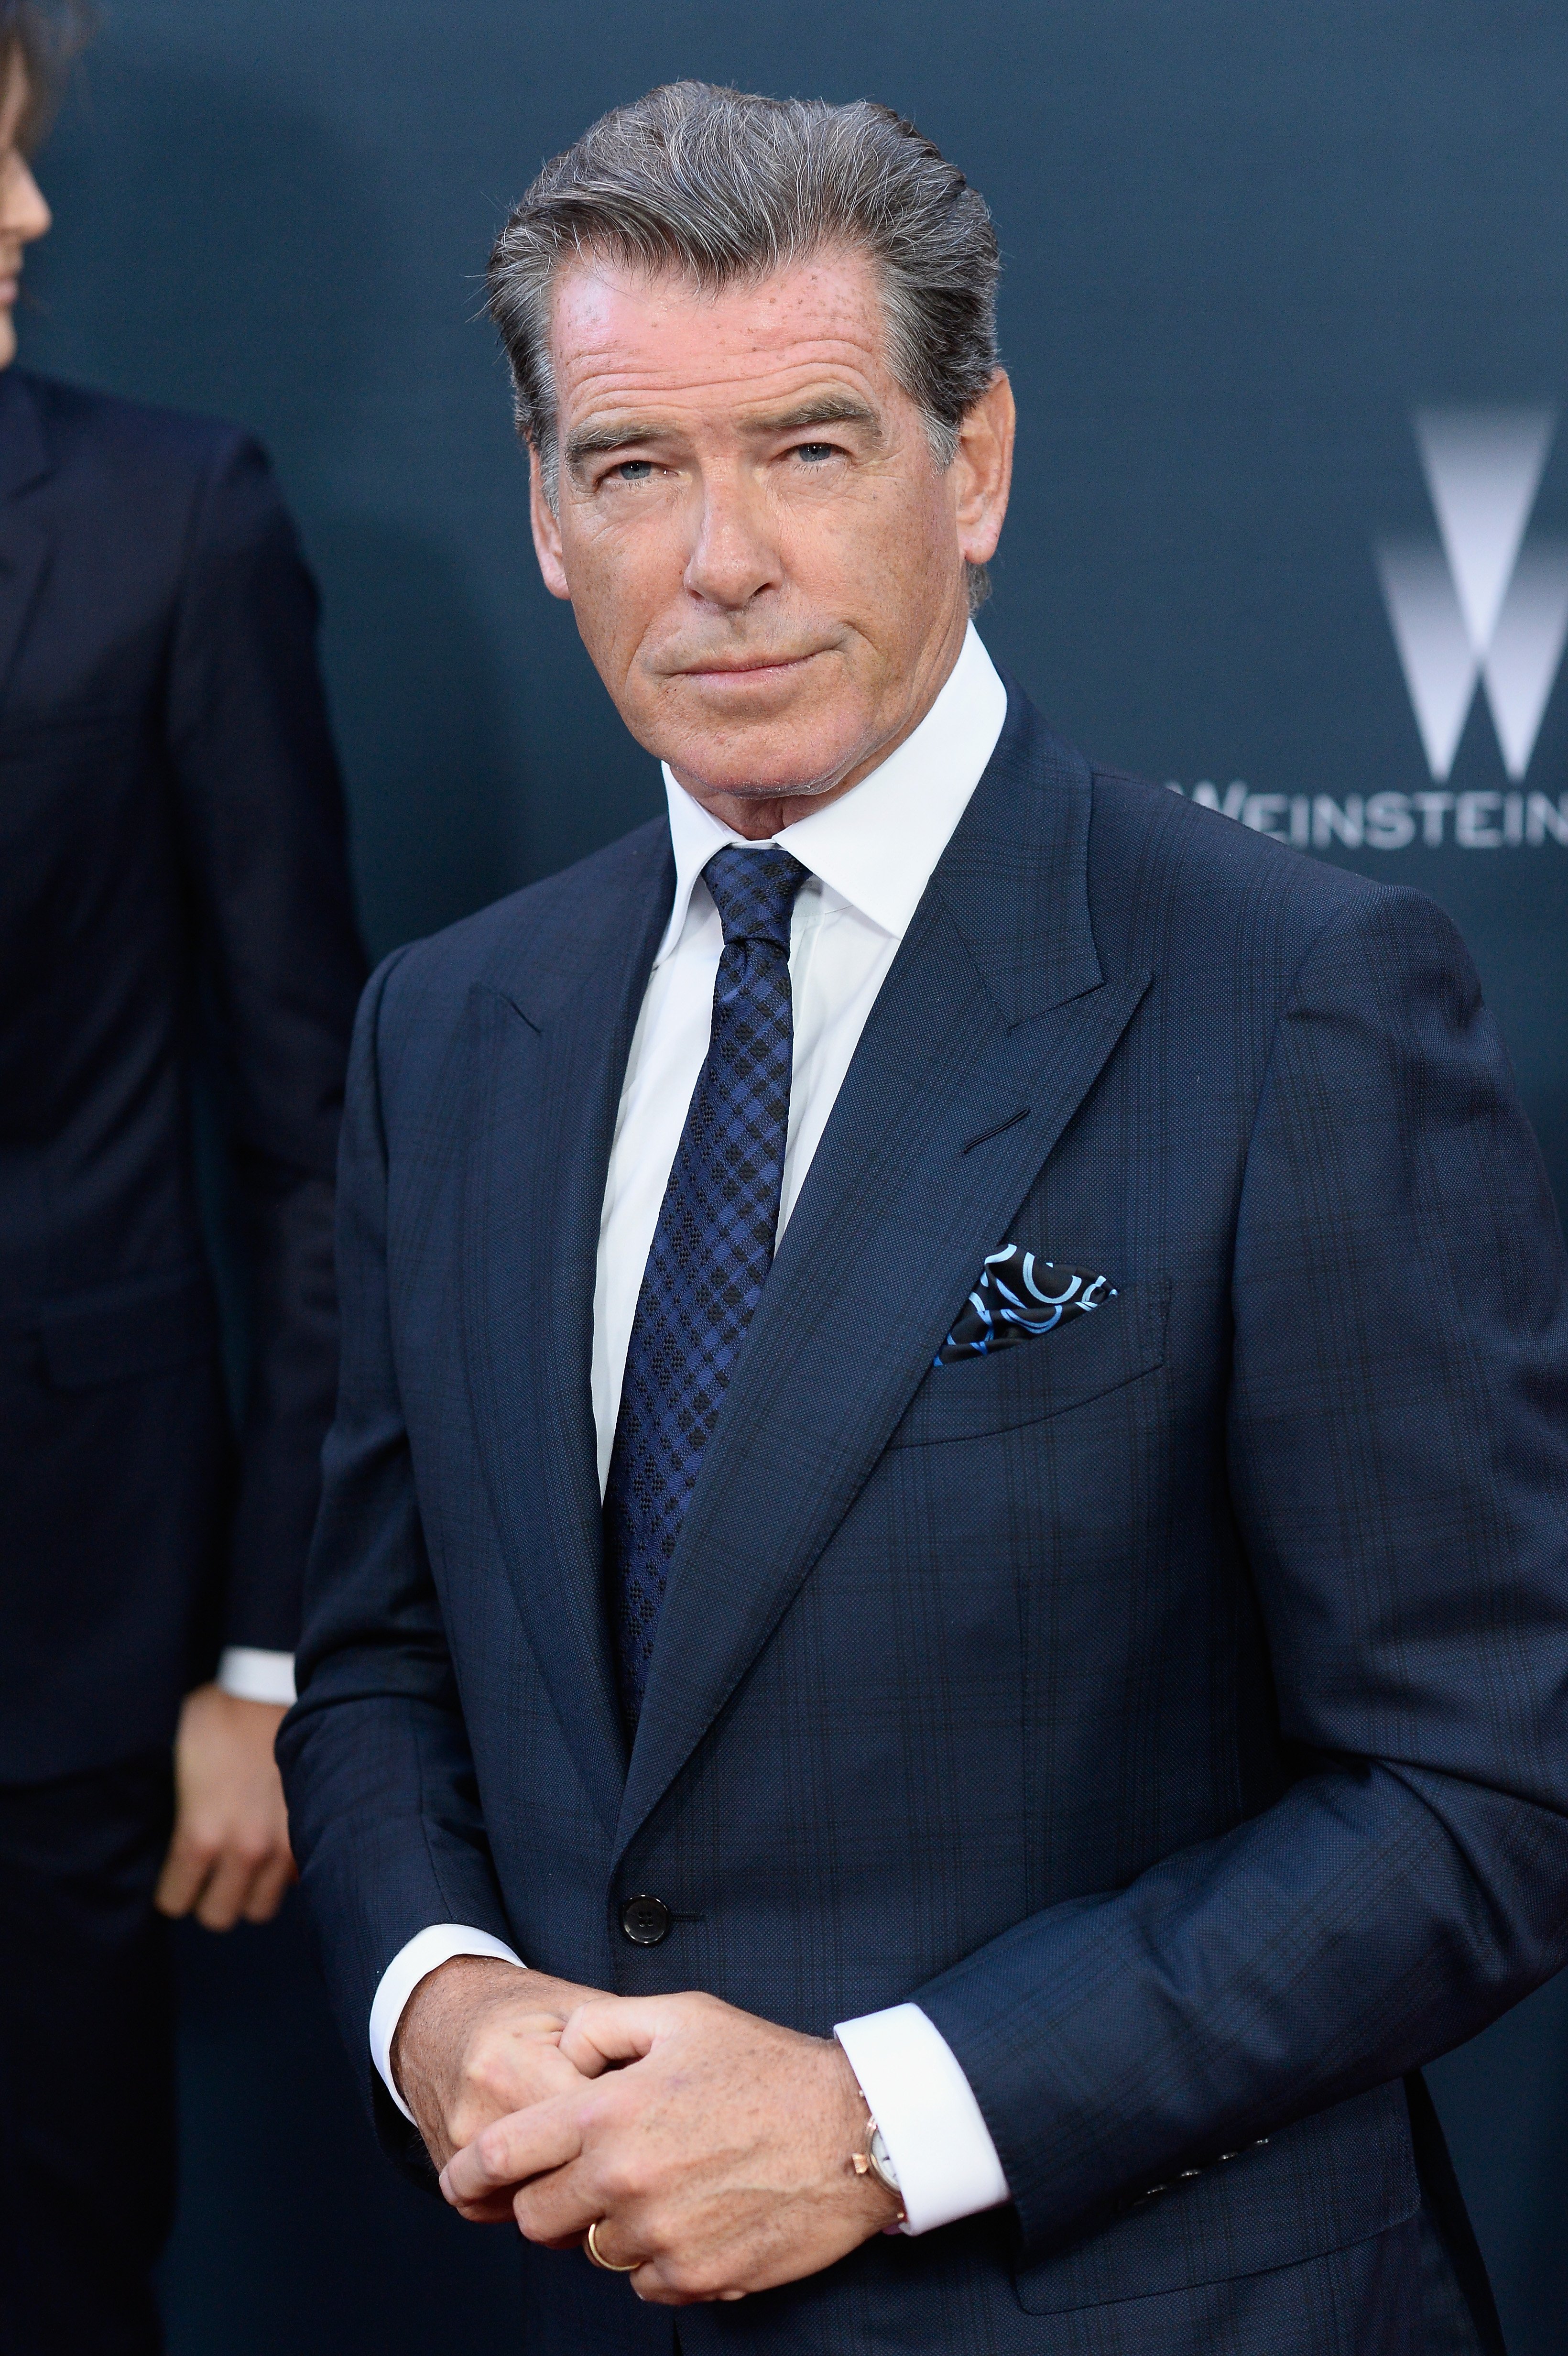 Pierce Brosnan arrives at The Premiere Of The Weinstein Company's "No Escape" on August 17, 2015, in Los Angeles, California. | Source: Getty Images.